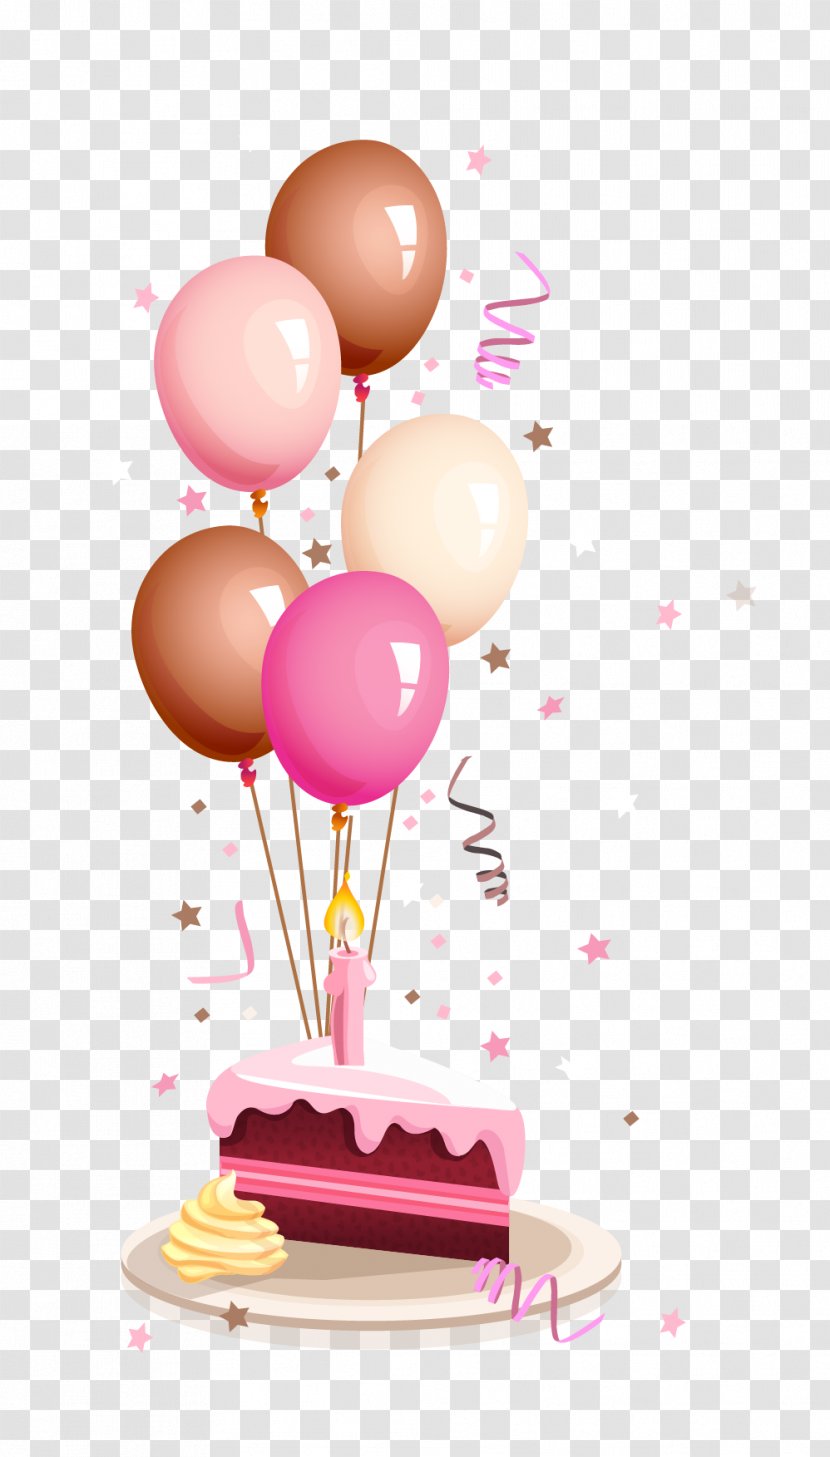 Happy Birthday To You Wish Greeting Card - Candle - Colorful Balloons And Cake Cartoon Transparent PNG